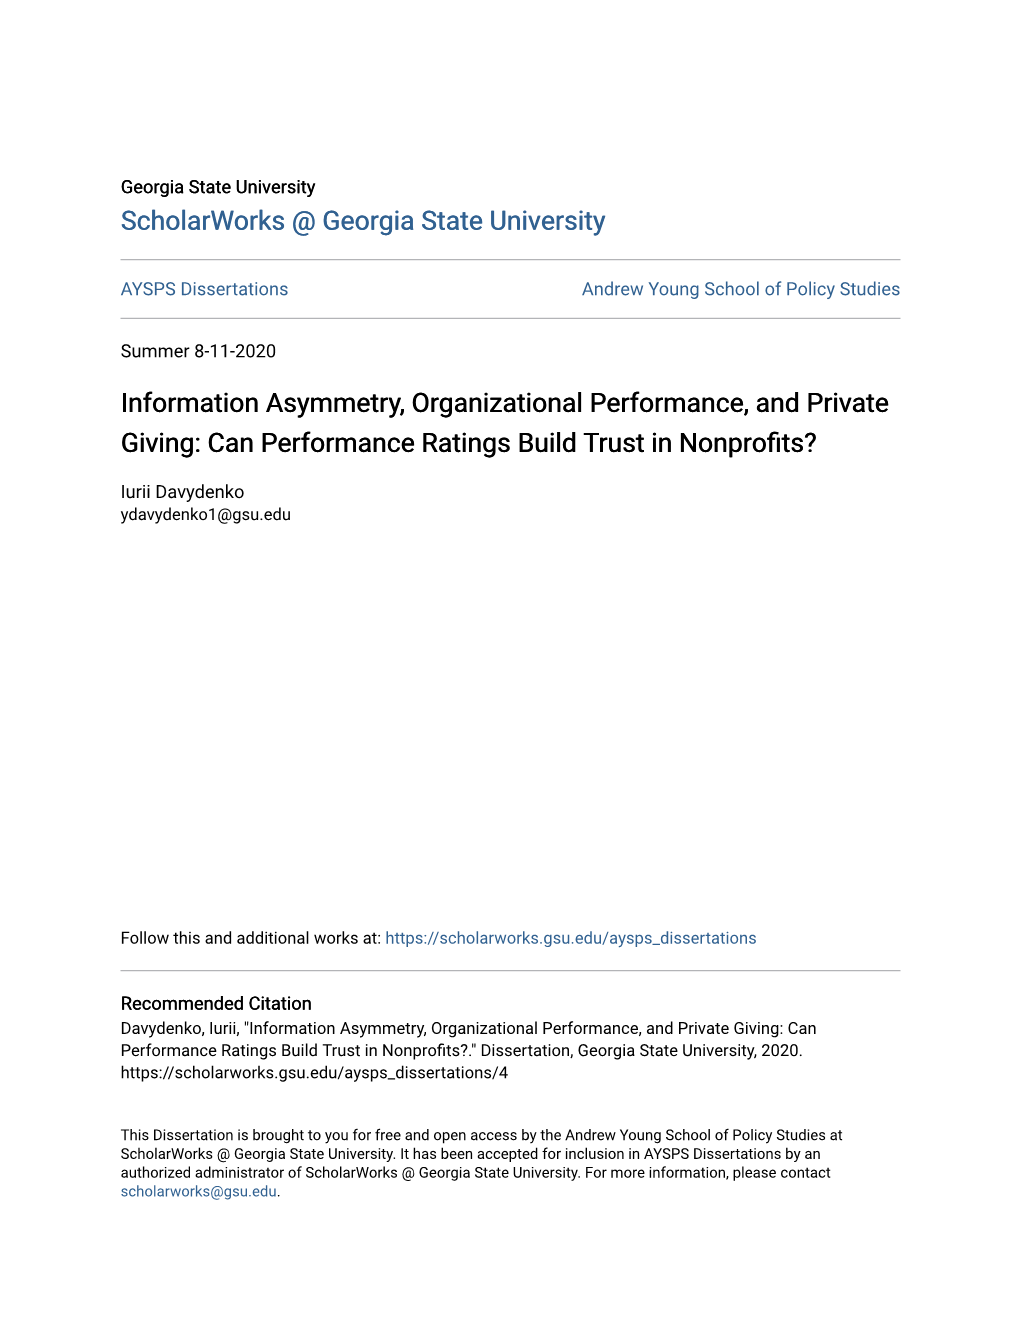 Information Asymmetry, Organizational Performance, and Private Giving: Can Performance Ratings Build Trust in Nonprofits?